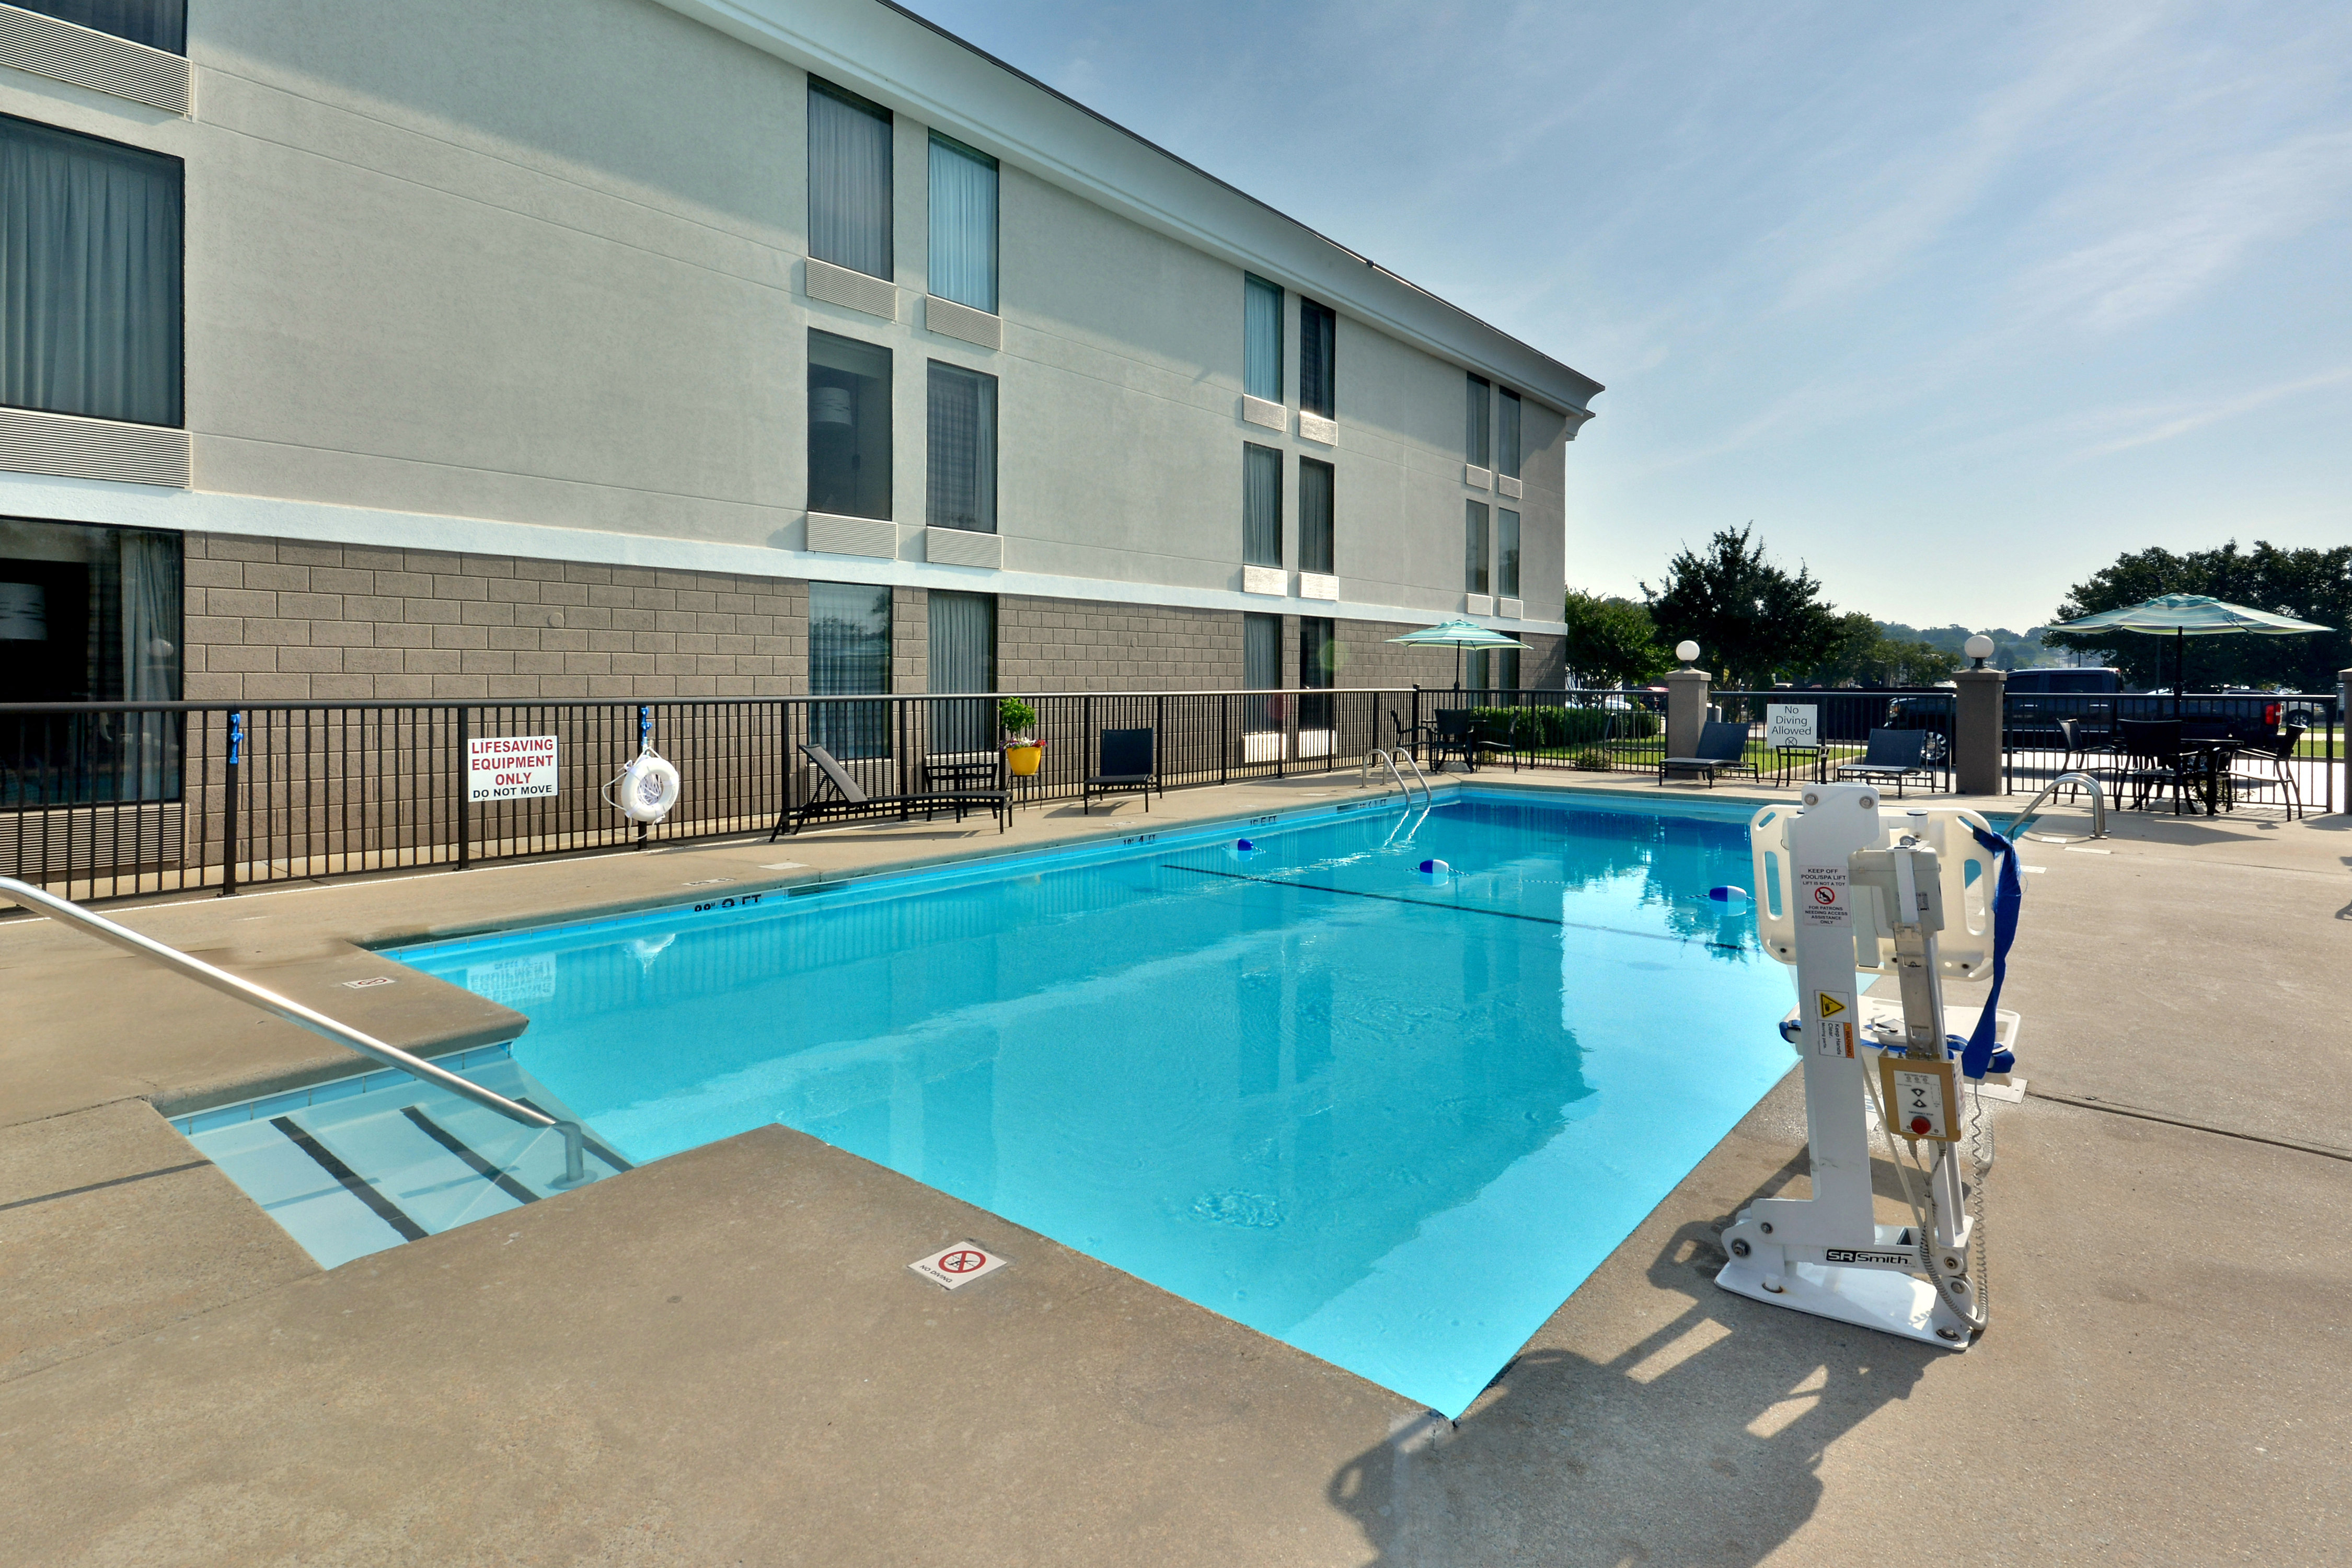 Guests with disabilities will appreciate our ADA pool lift.